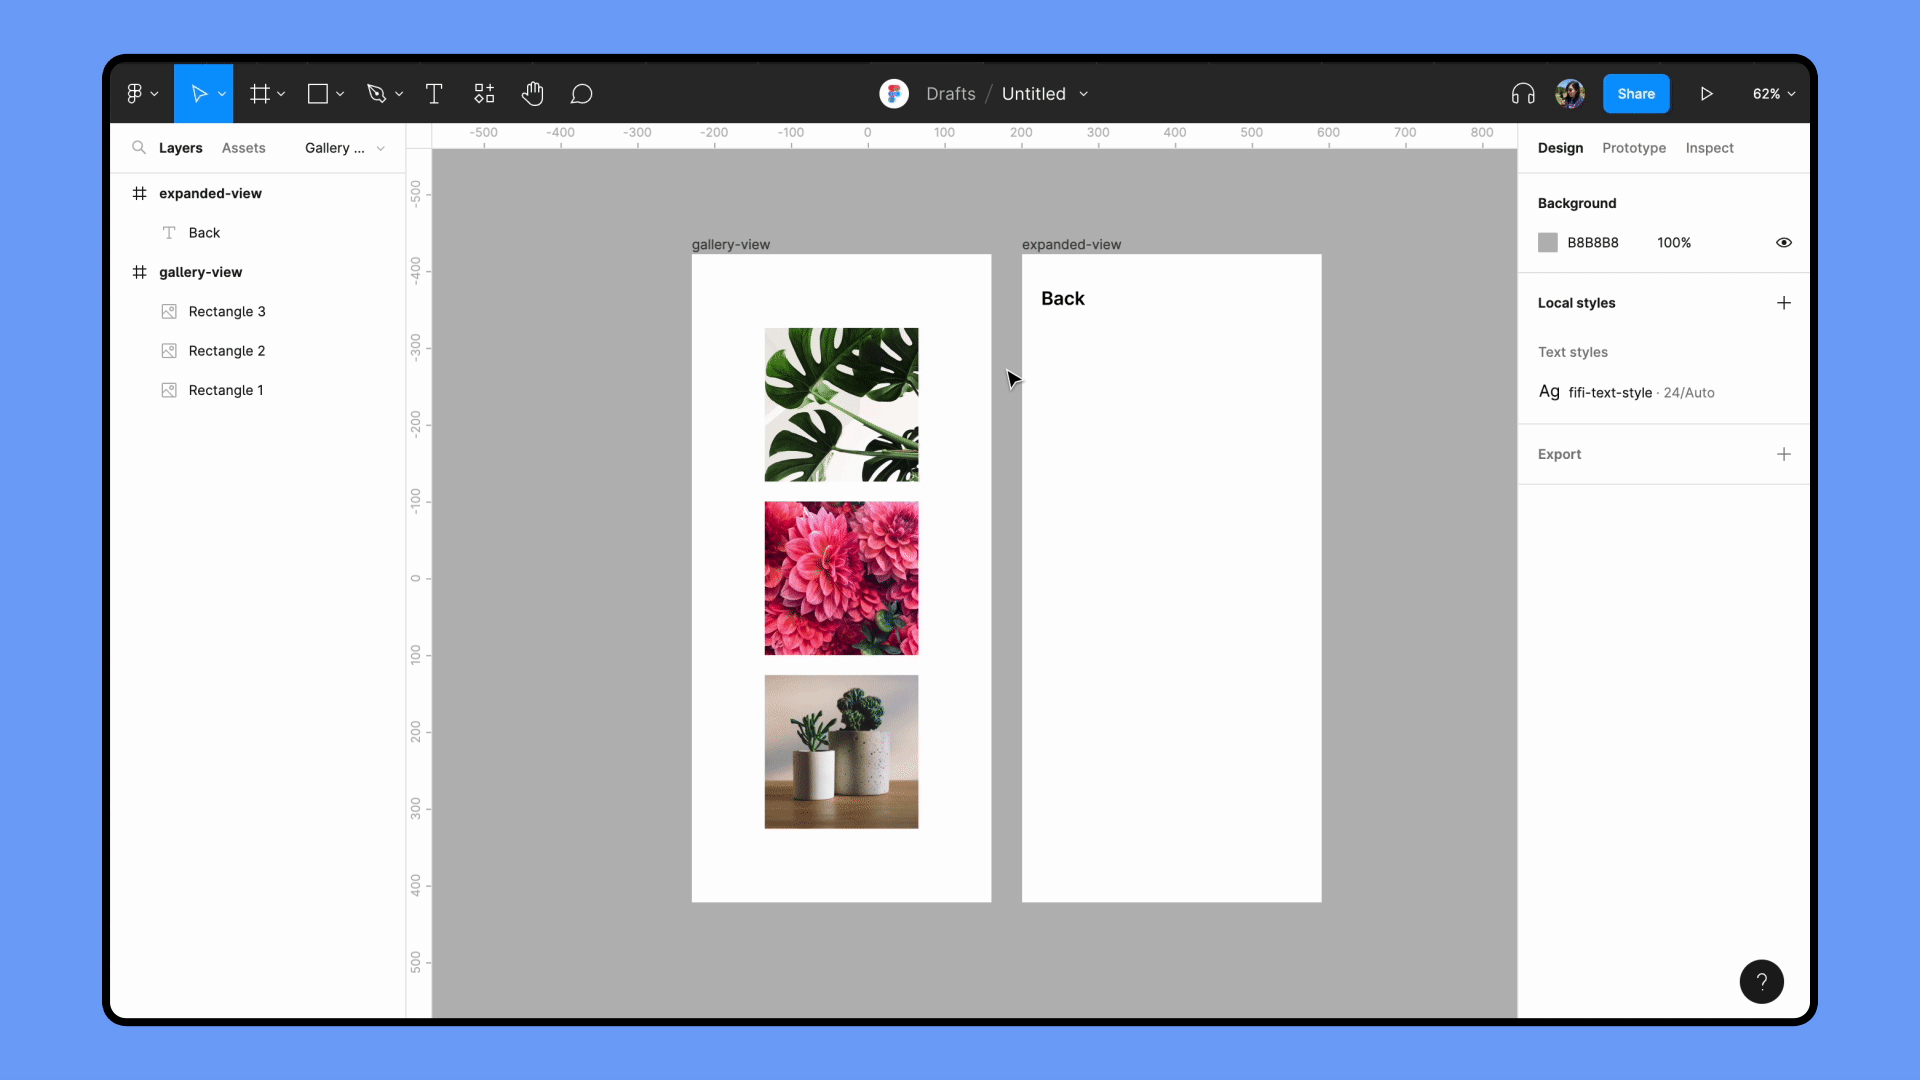 User clicks Rectangle tool, adds a rectangle to frame, and resizes it.